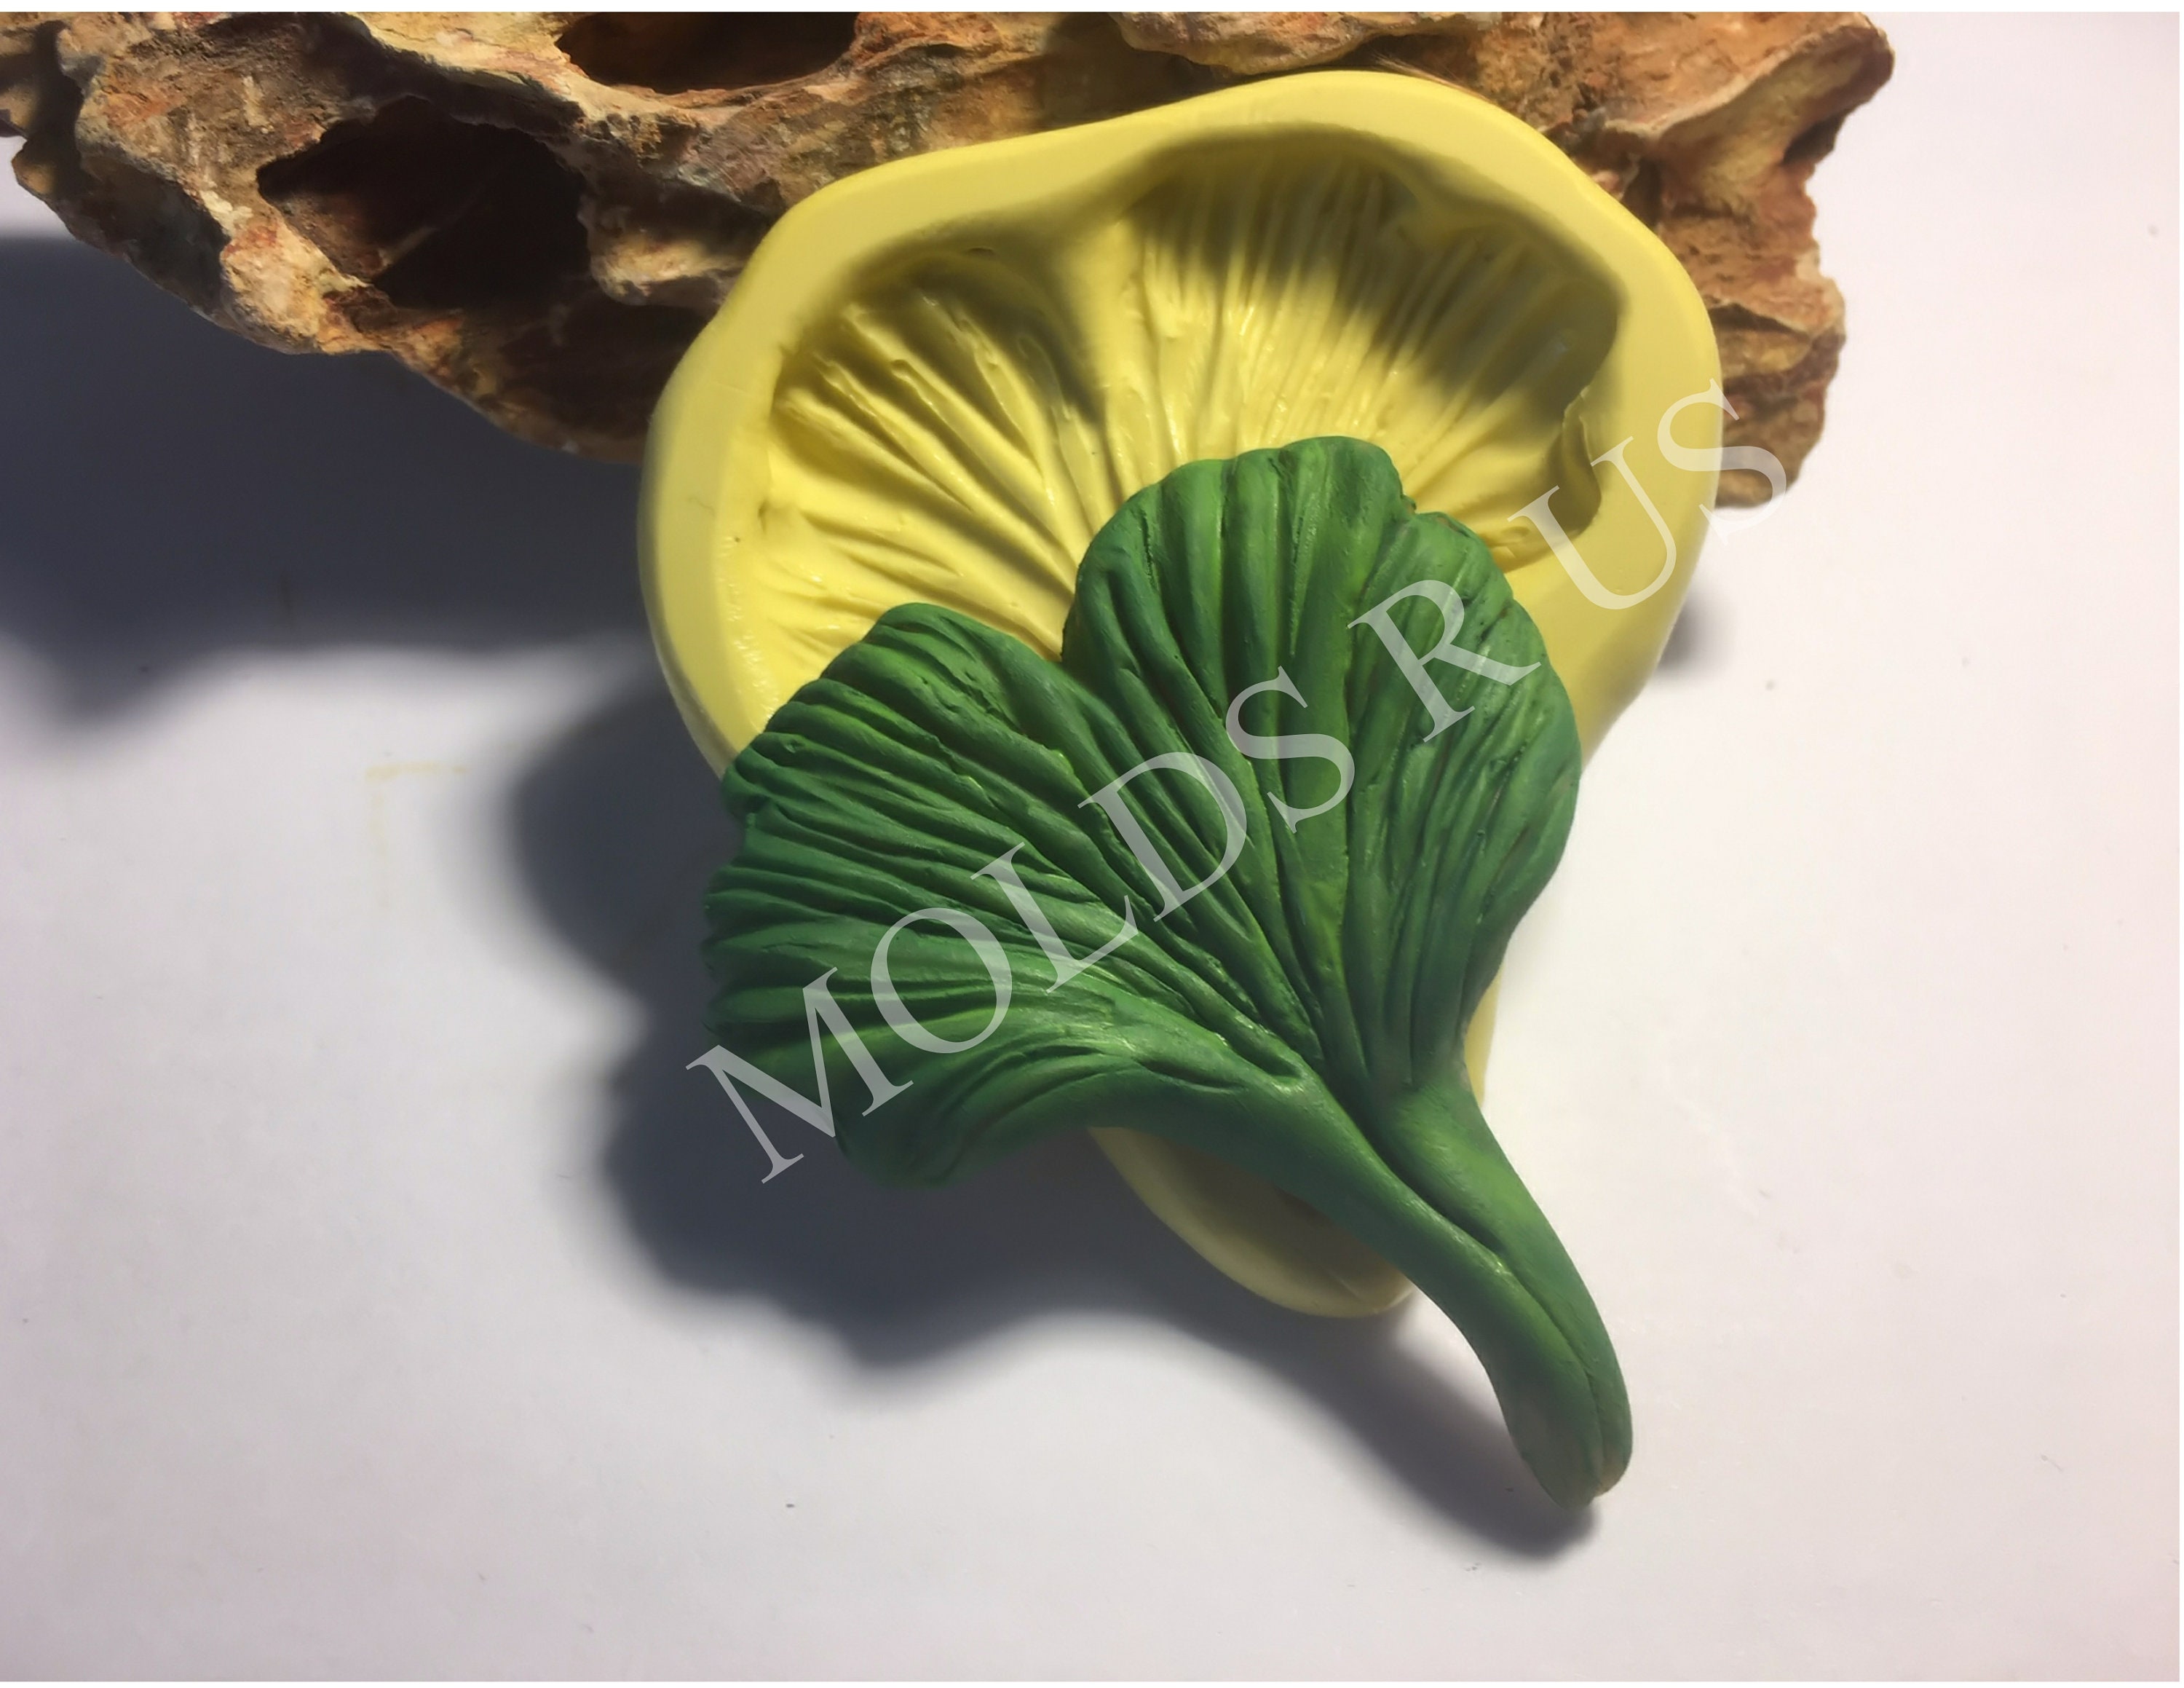  Leaf Fondant Molds 3 Pcs, Mini Ginkgo Biloba Fondant Molds  Four-Leaf Clover Maple Cake Decorating Chocolate Silicone Mold for Candy  Sugar Cupcake Topper Cake Pop Popsicle Candle Soap : Home 